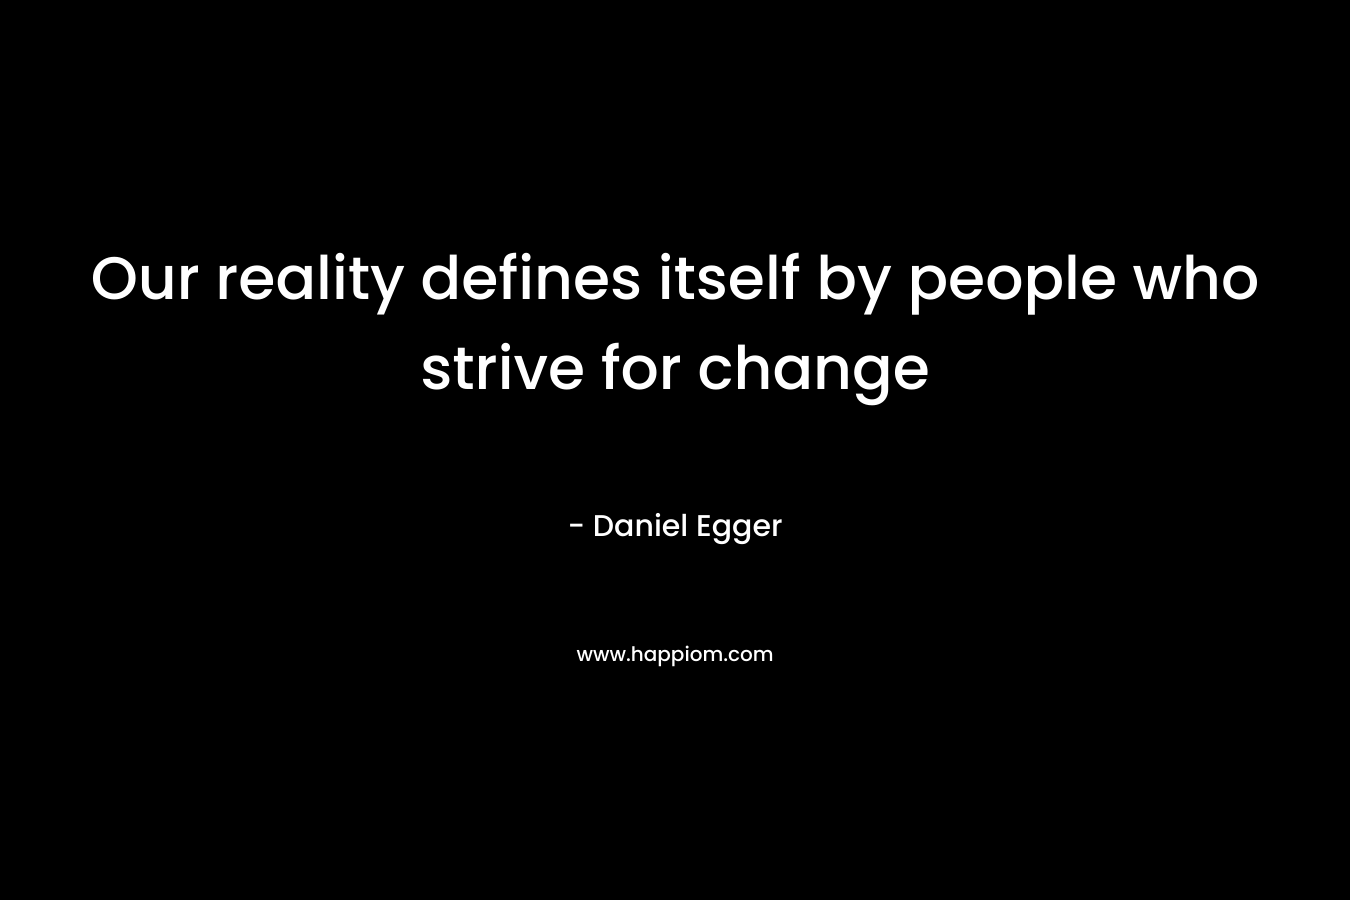 Our reality defines itself by people who strive for change